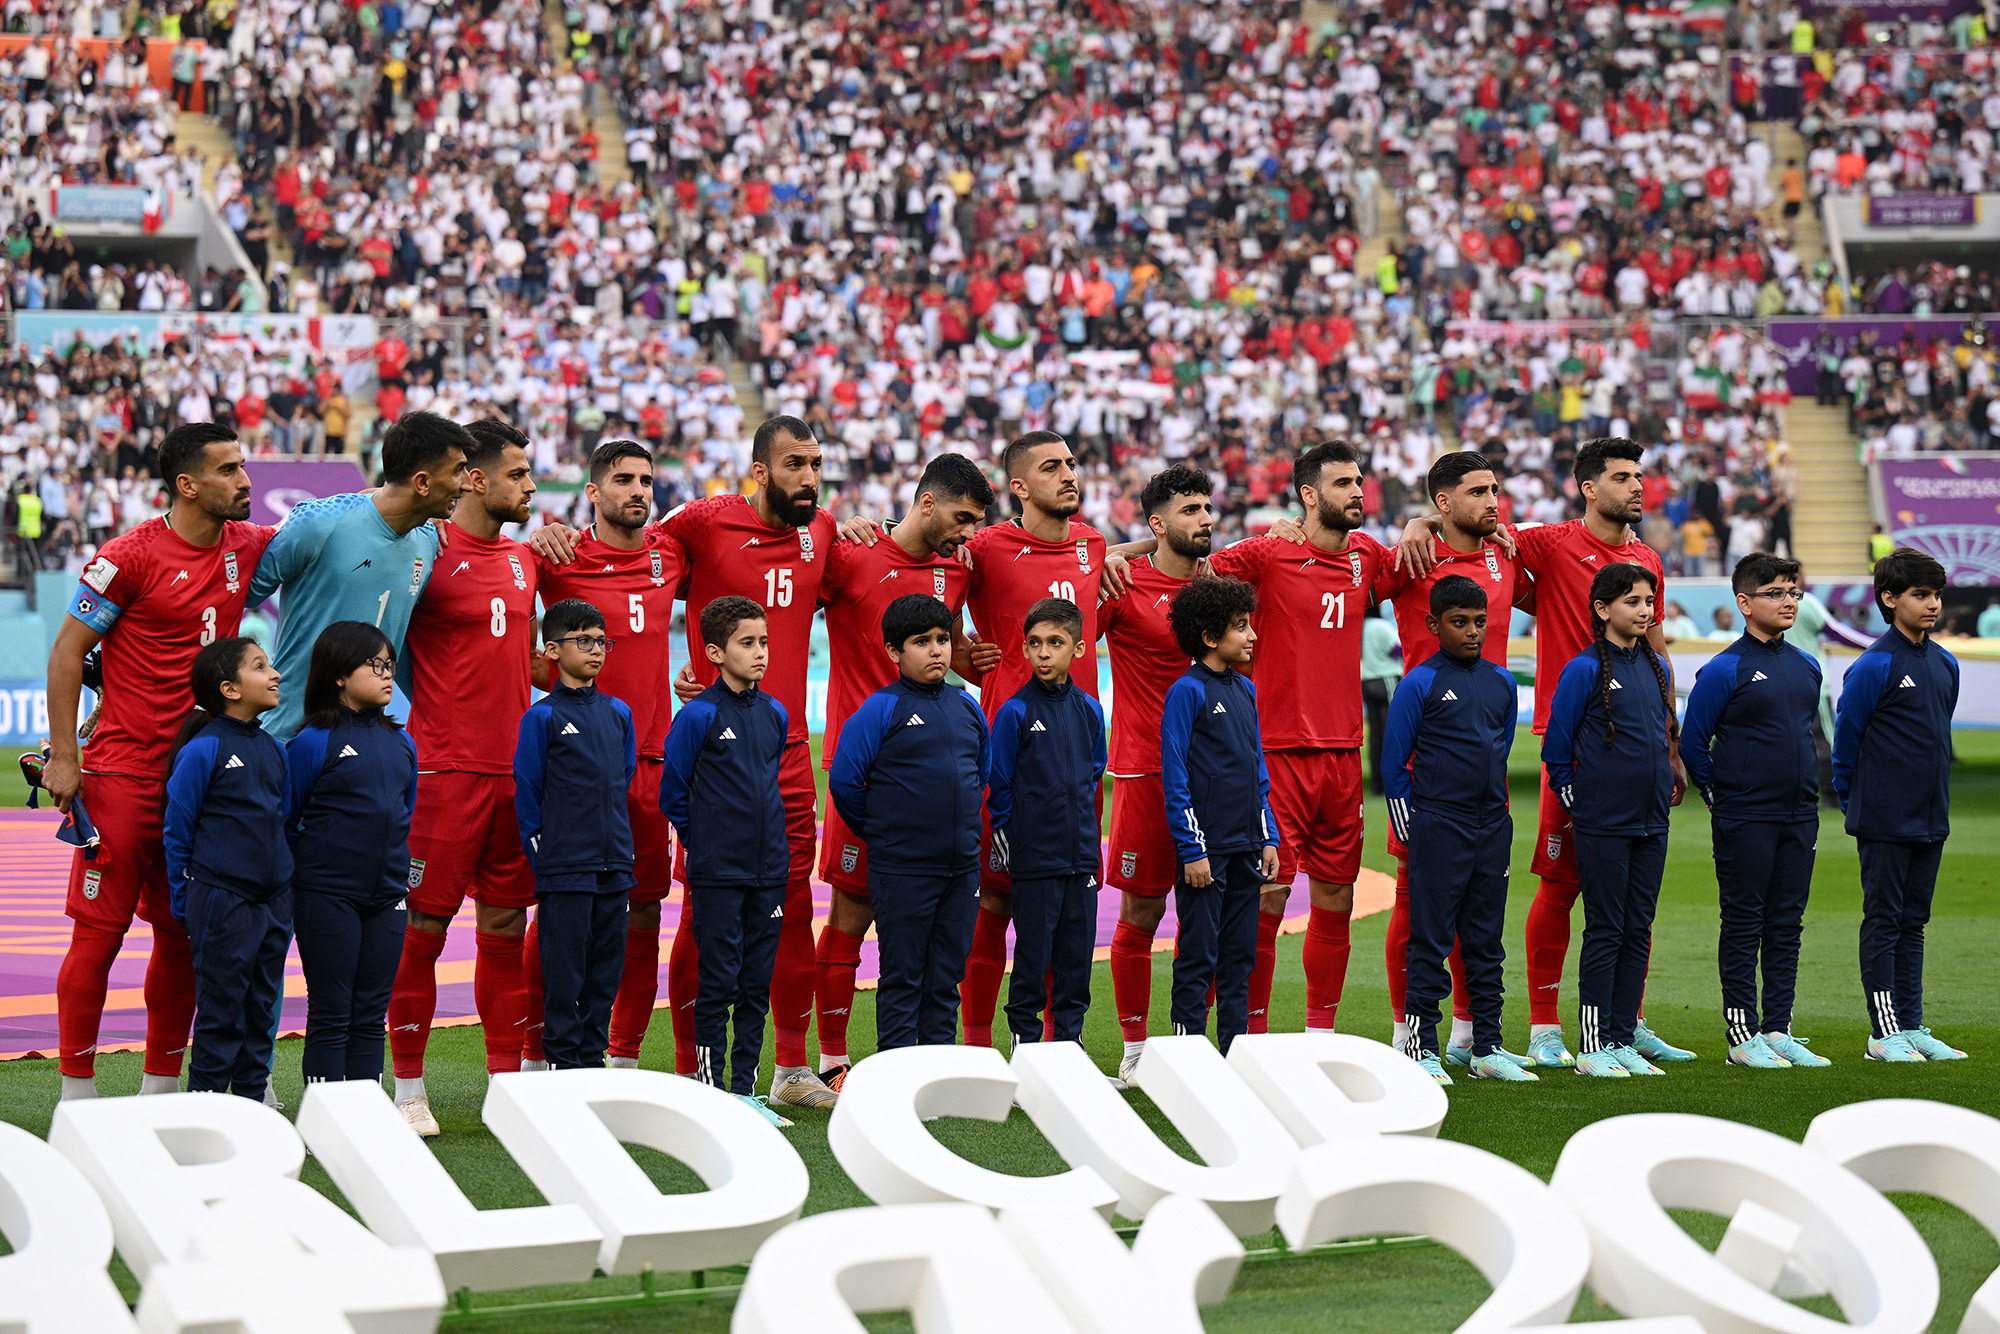 Iranian players line up for the national anthem prior to the FIFA World Cup Qatar 2022 Group B match between England and Iran at Khalifa International Stadium on November 21, in Doha, Qatar.